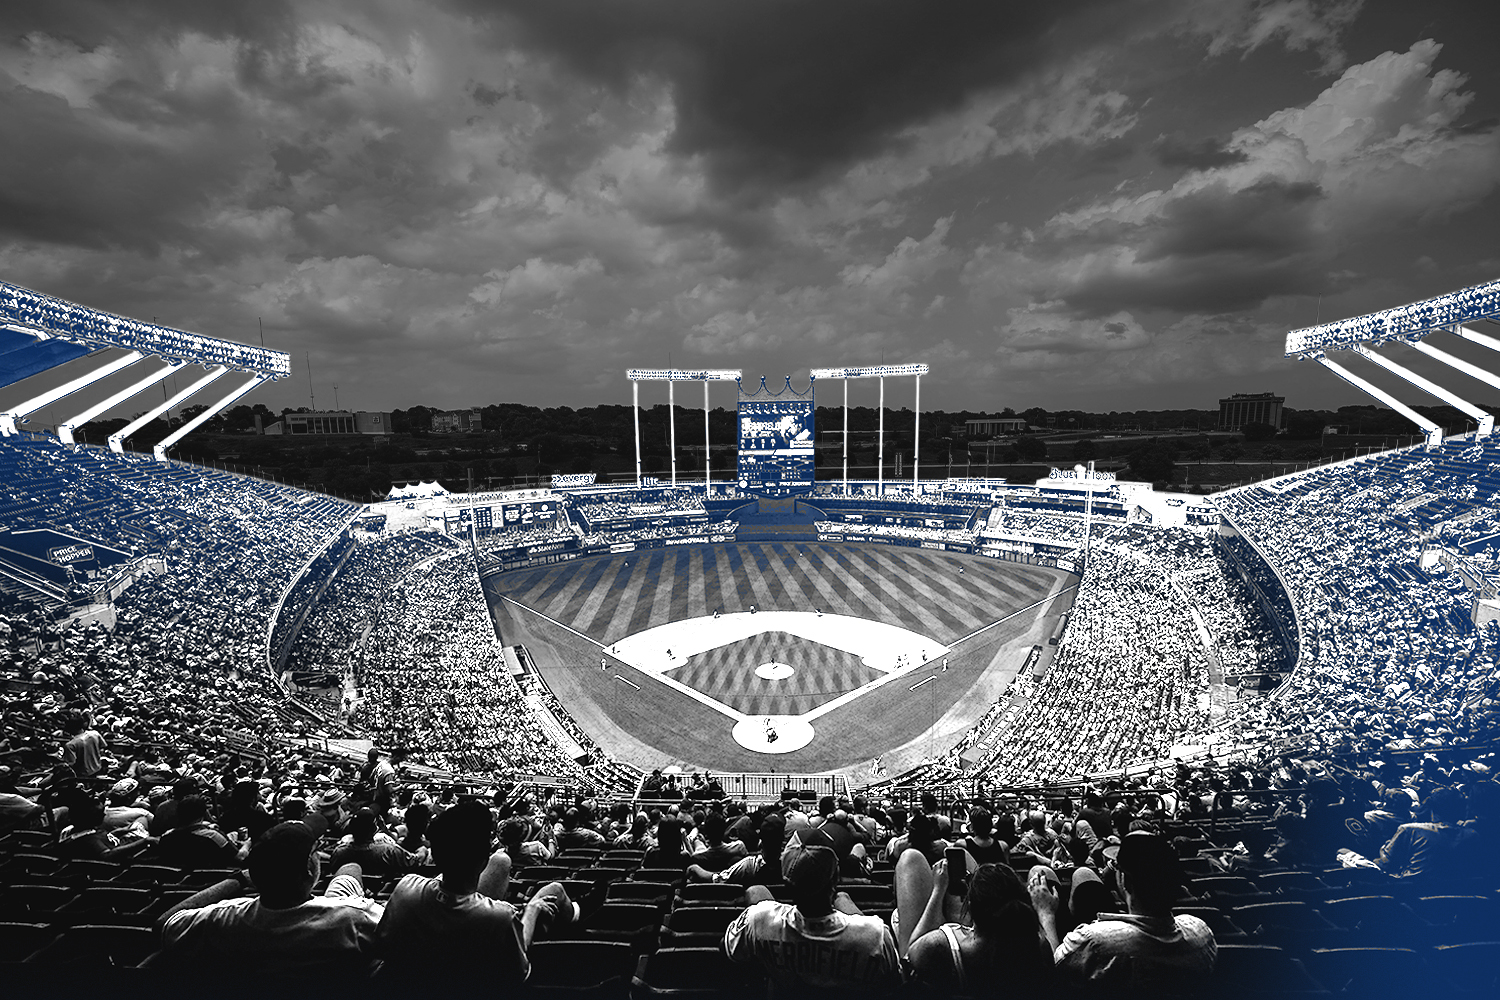 Royals announce plans to move to new ballpark in downtown Kansas City 